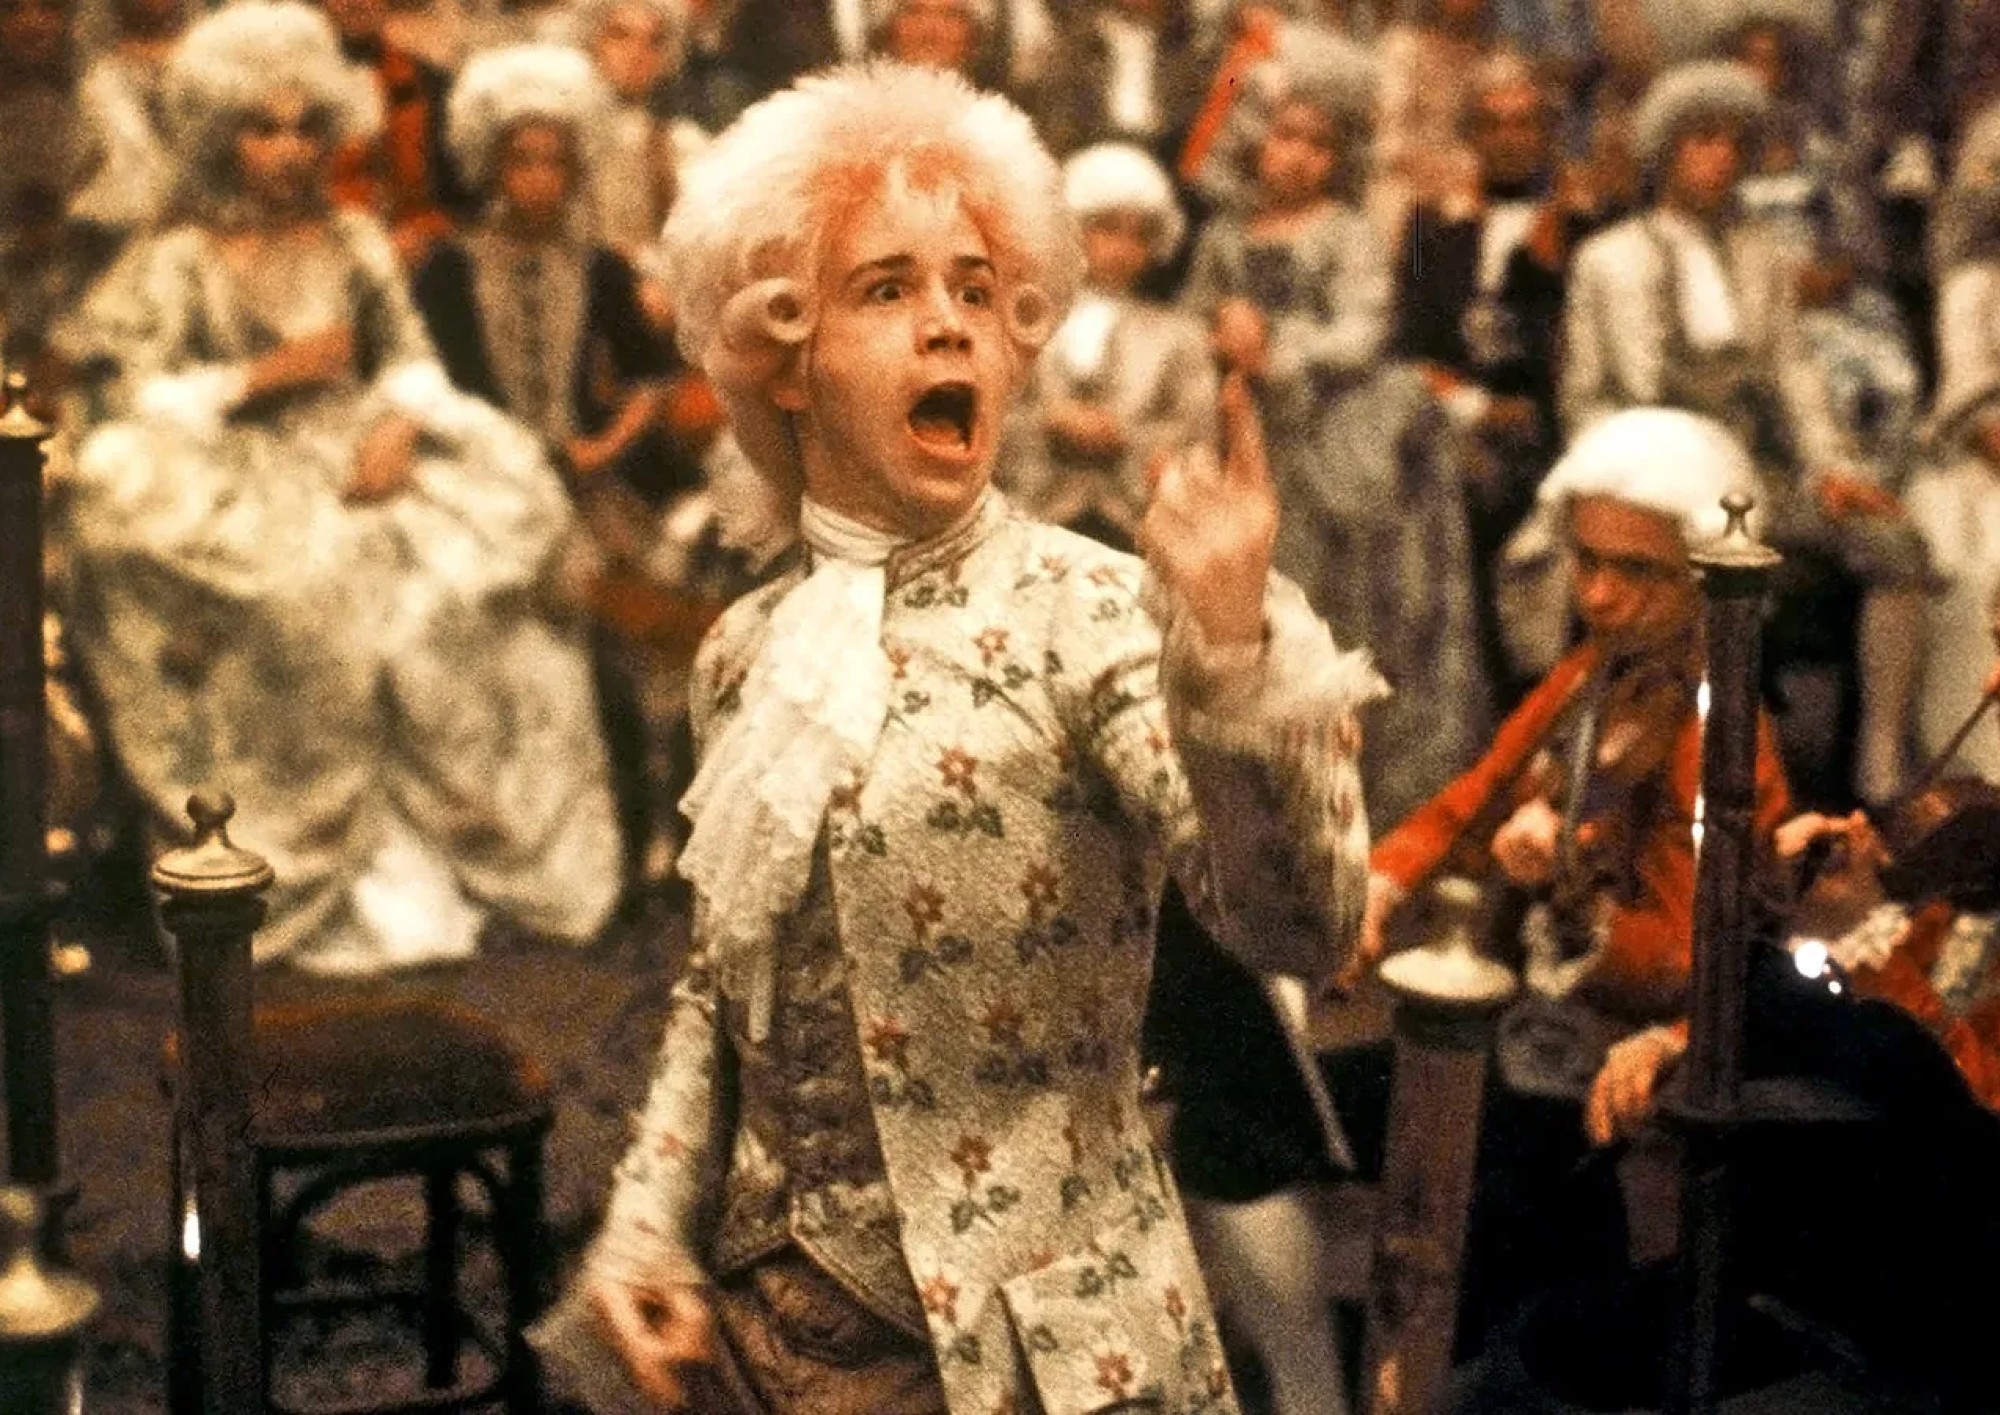 Image from the motion picture Amadeus